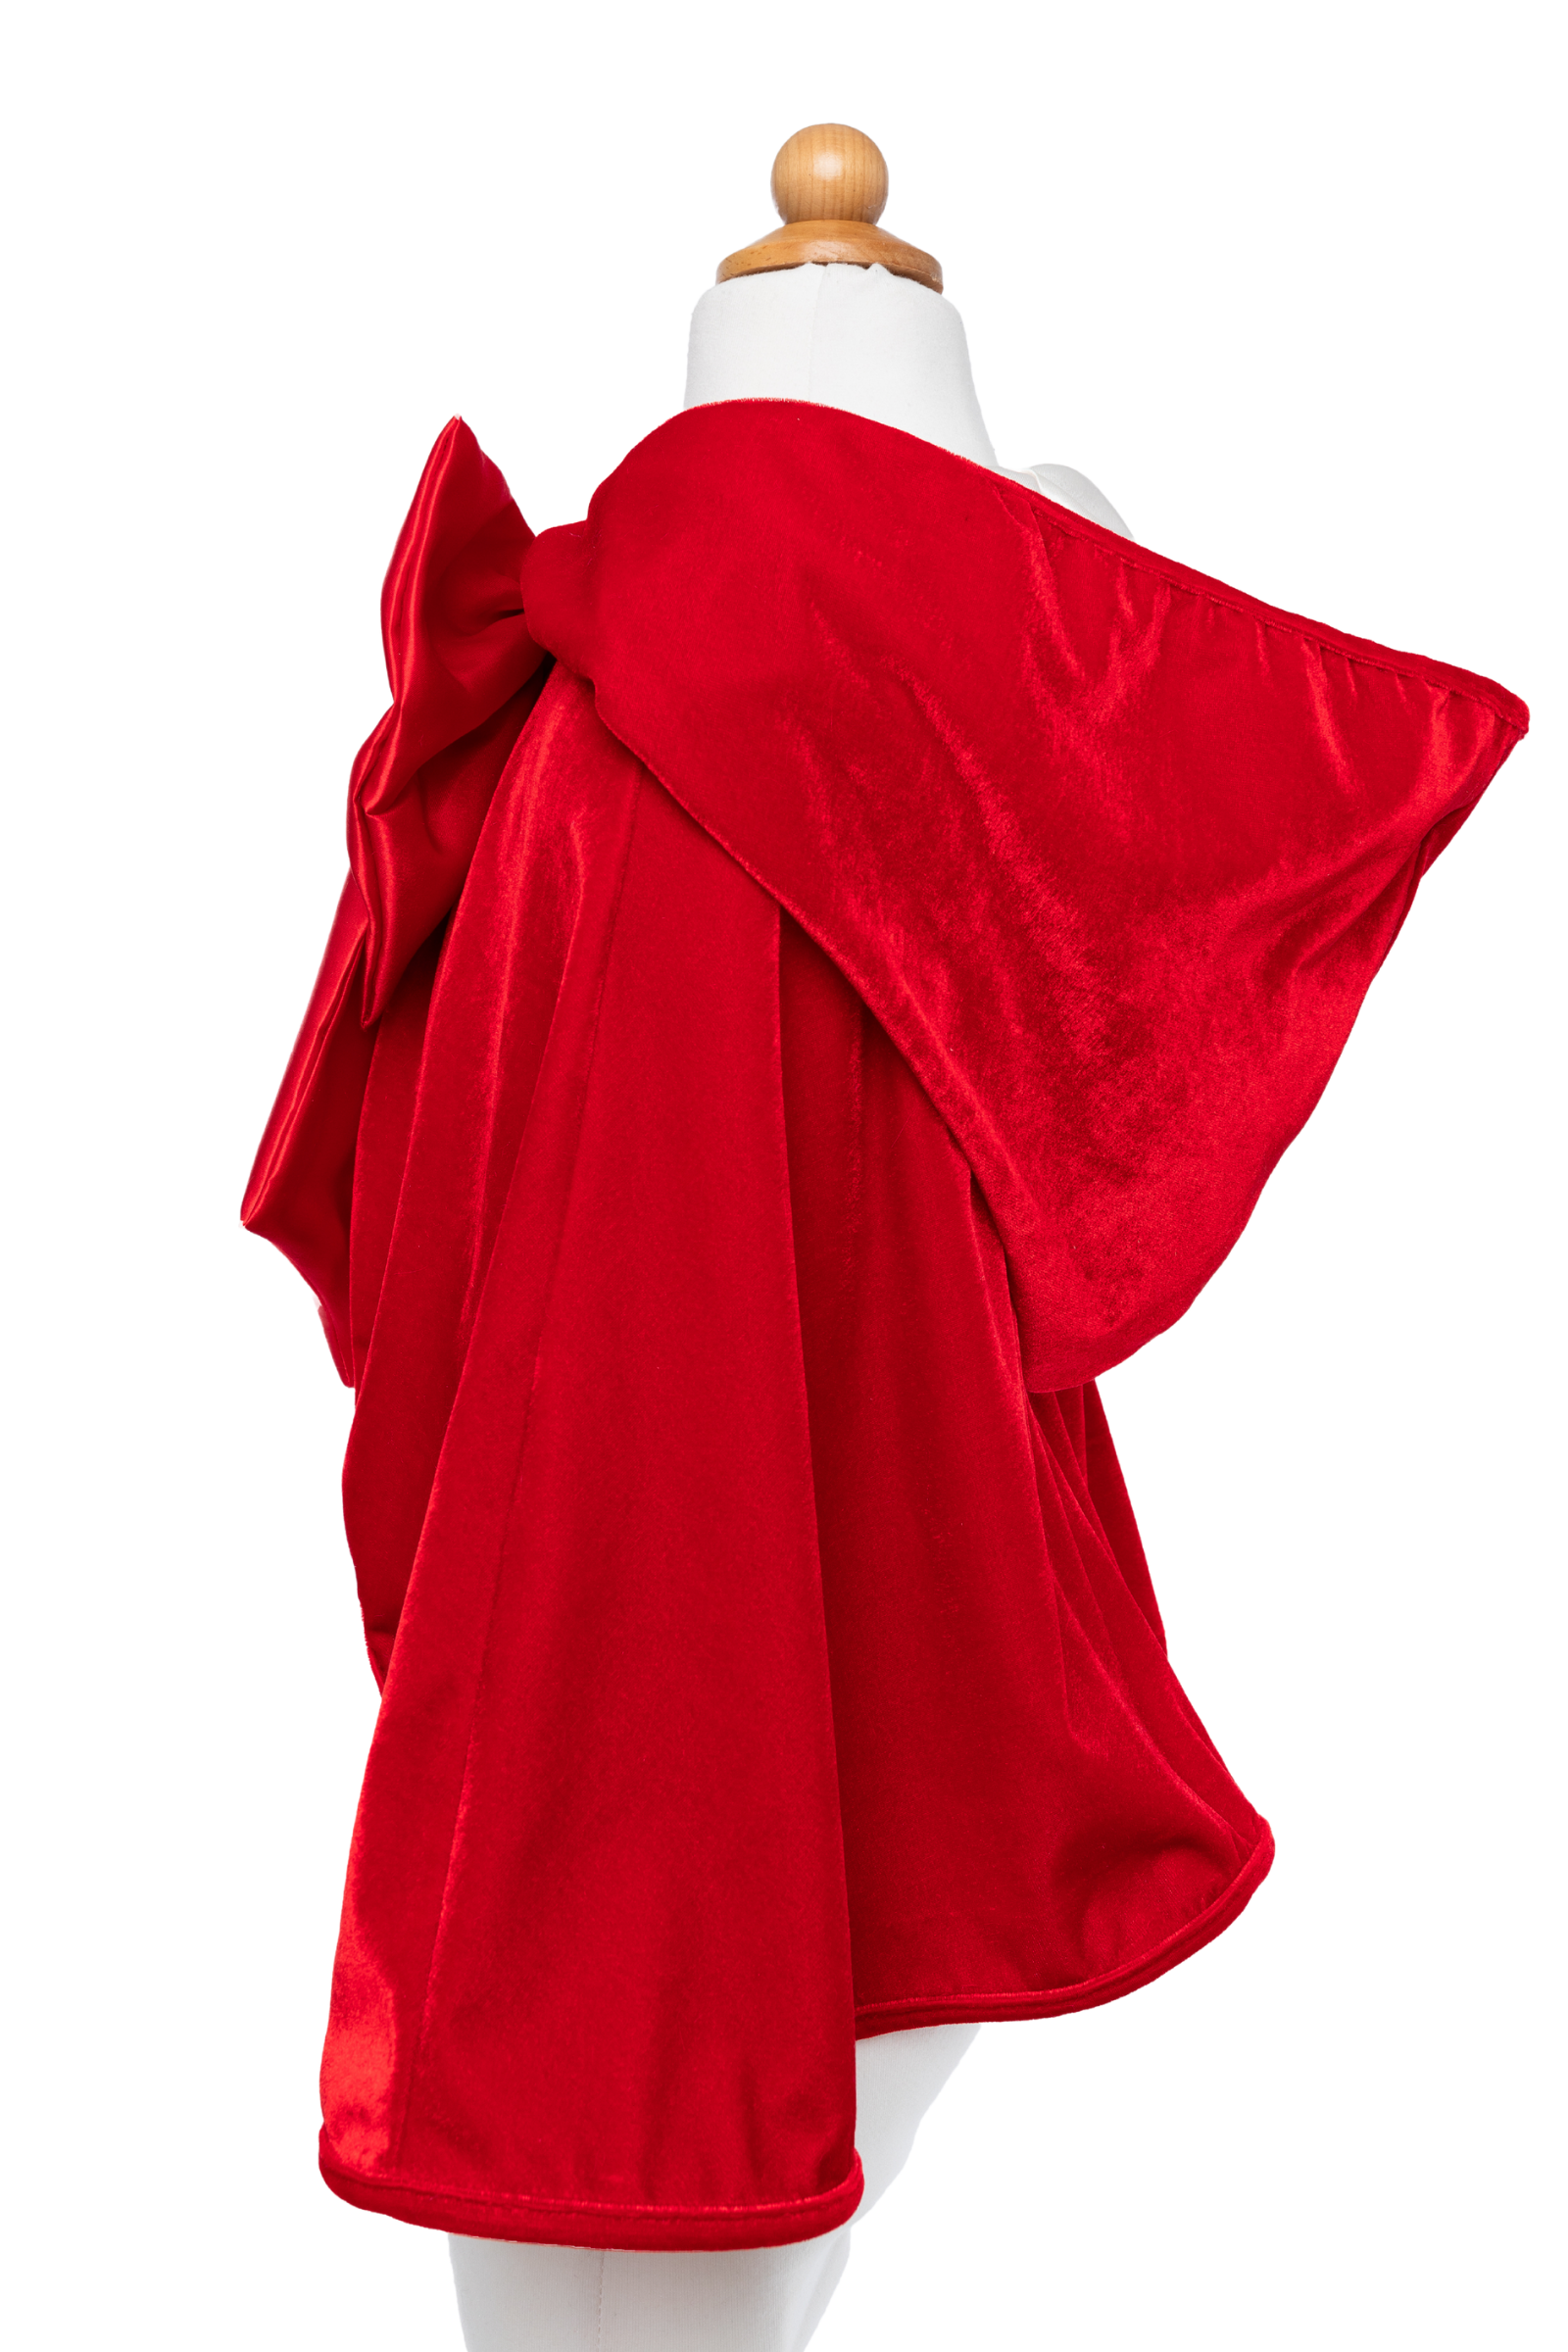 Woodland Storybook Little Red Riding Hood Cape